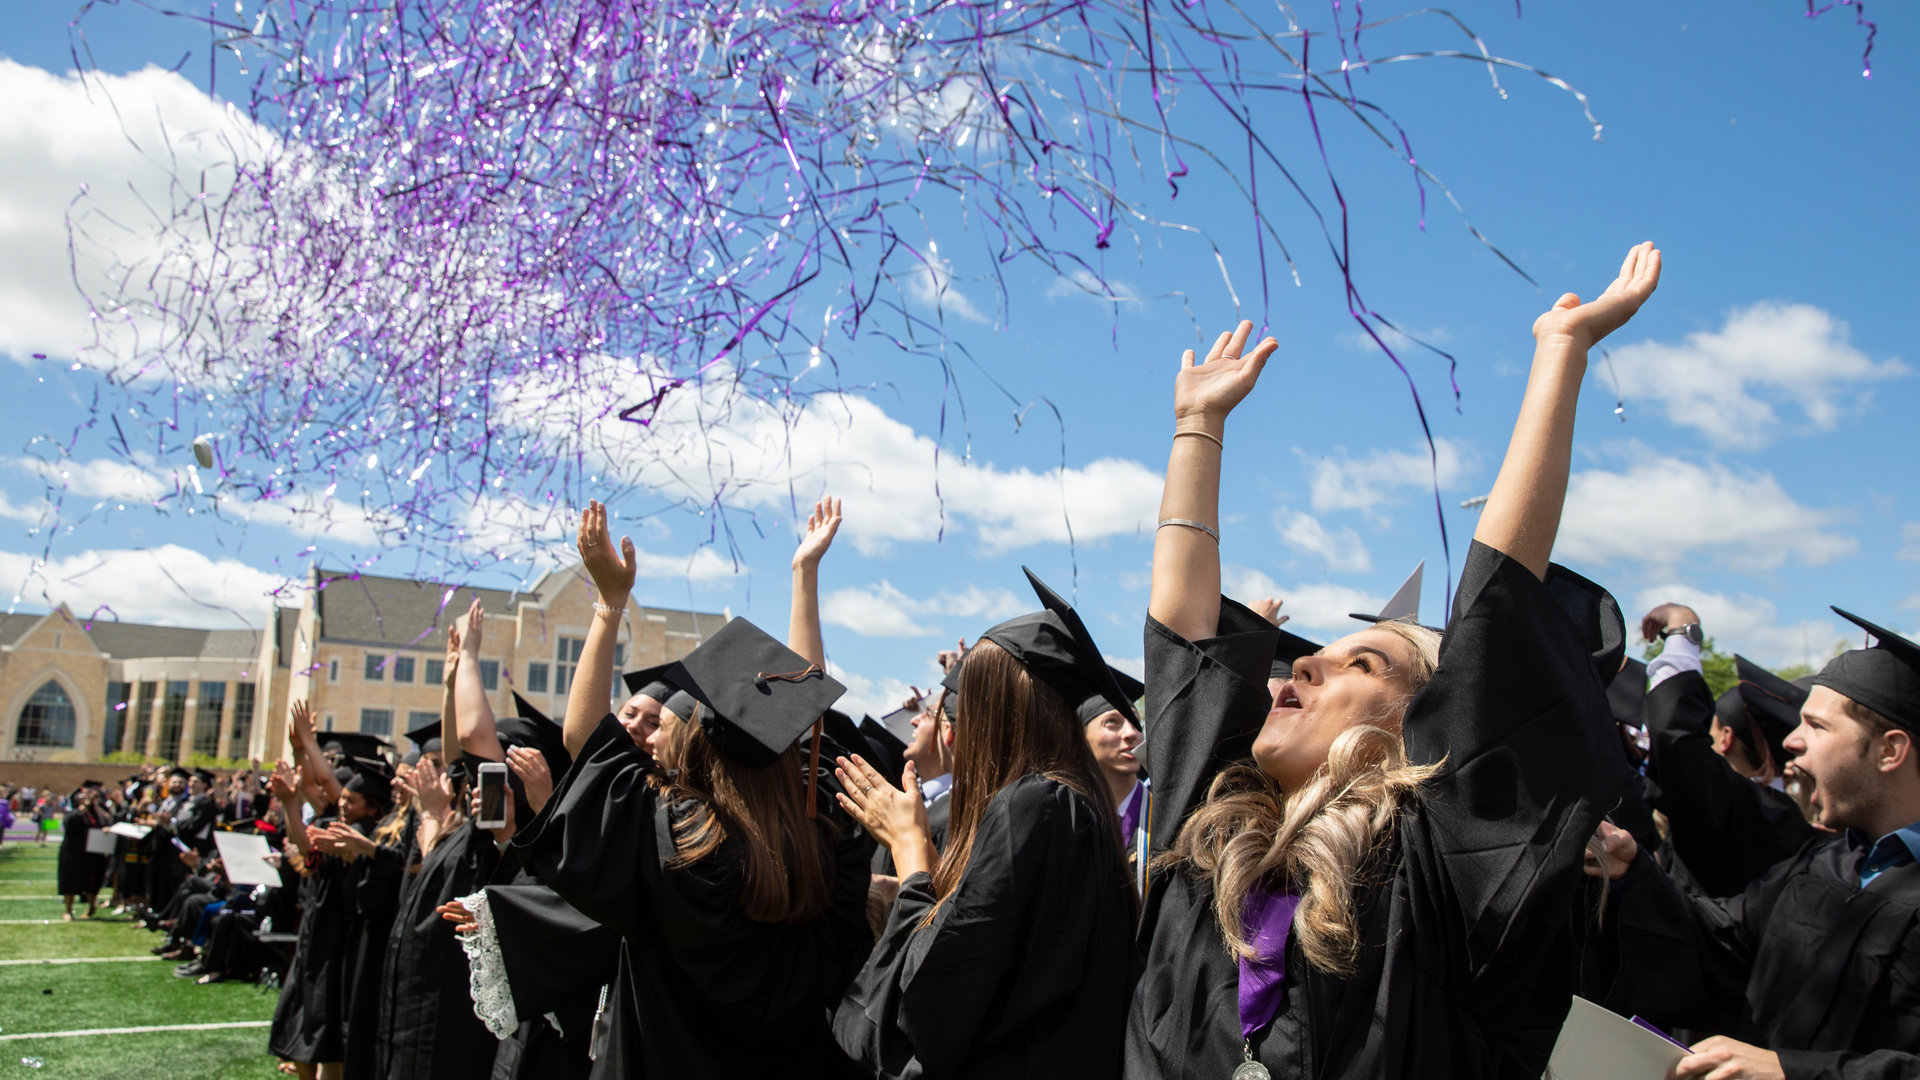 Students celebrate as confetti falls during Commencement